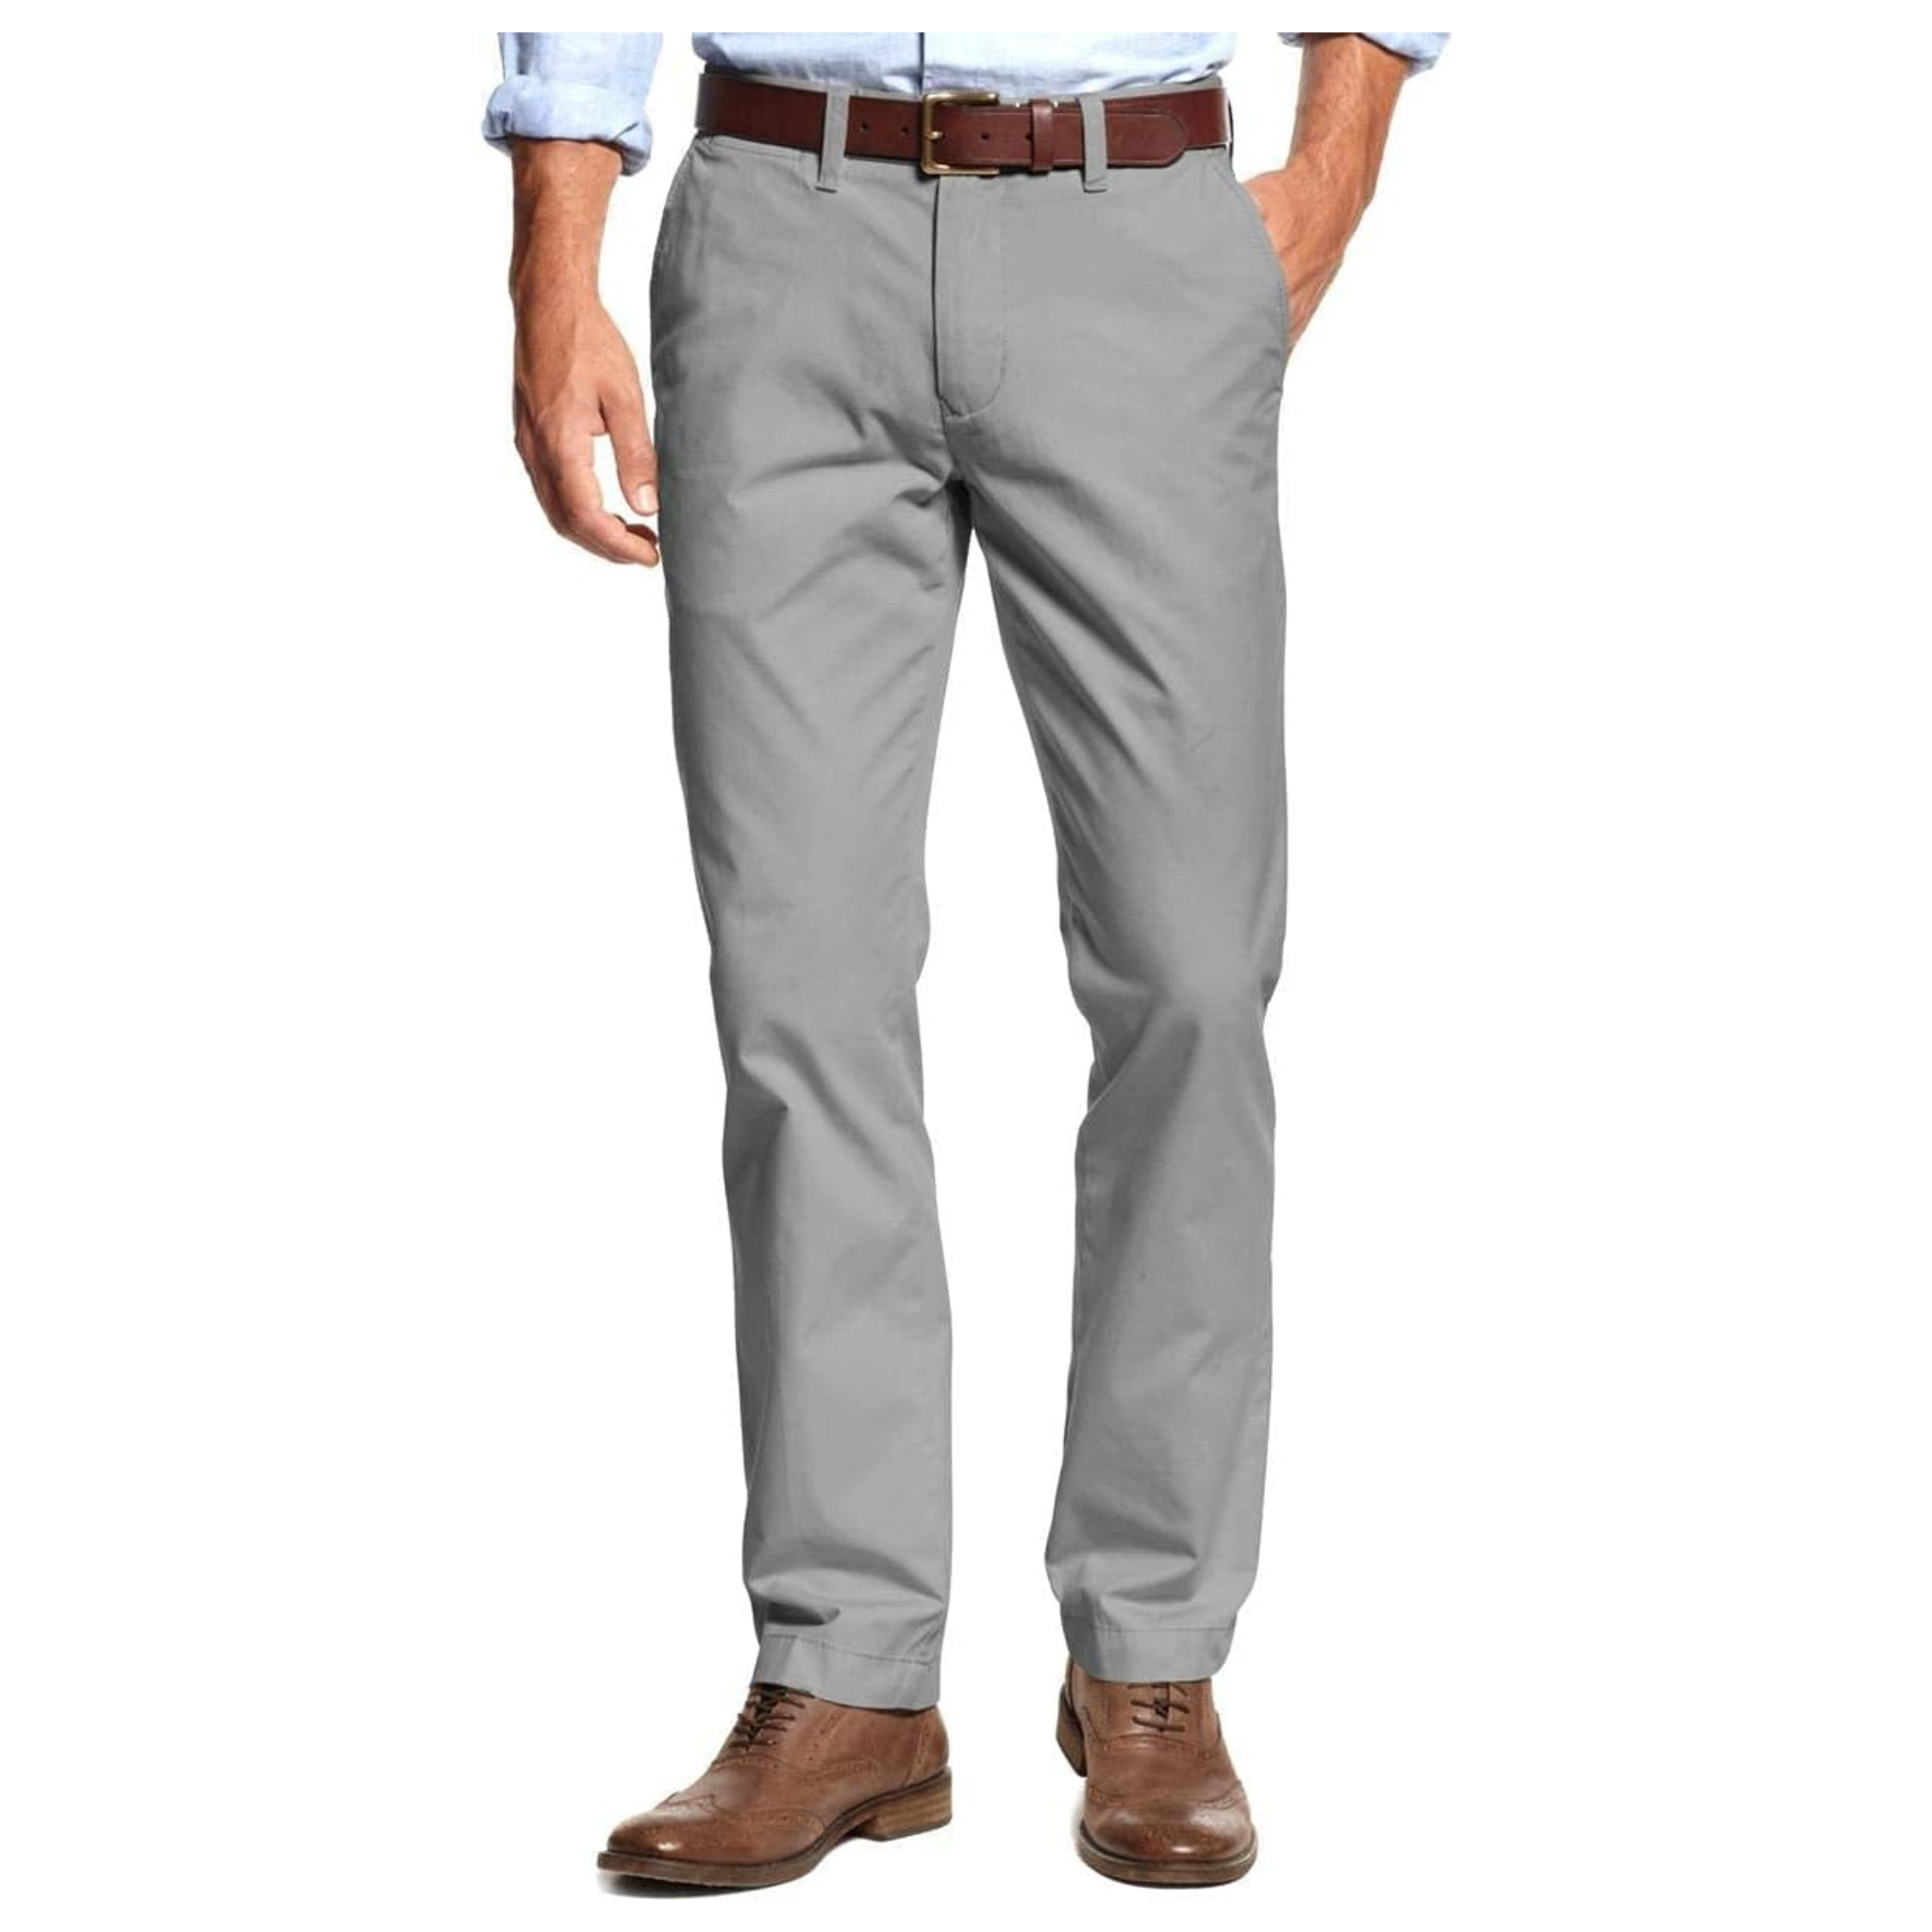 Tommy Hilfiger Men's Big & Tall Classic Fit Stretch Cotton Chino Pants (2 Colors)